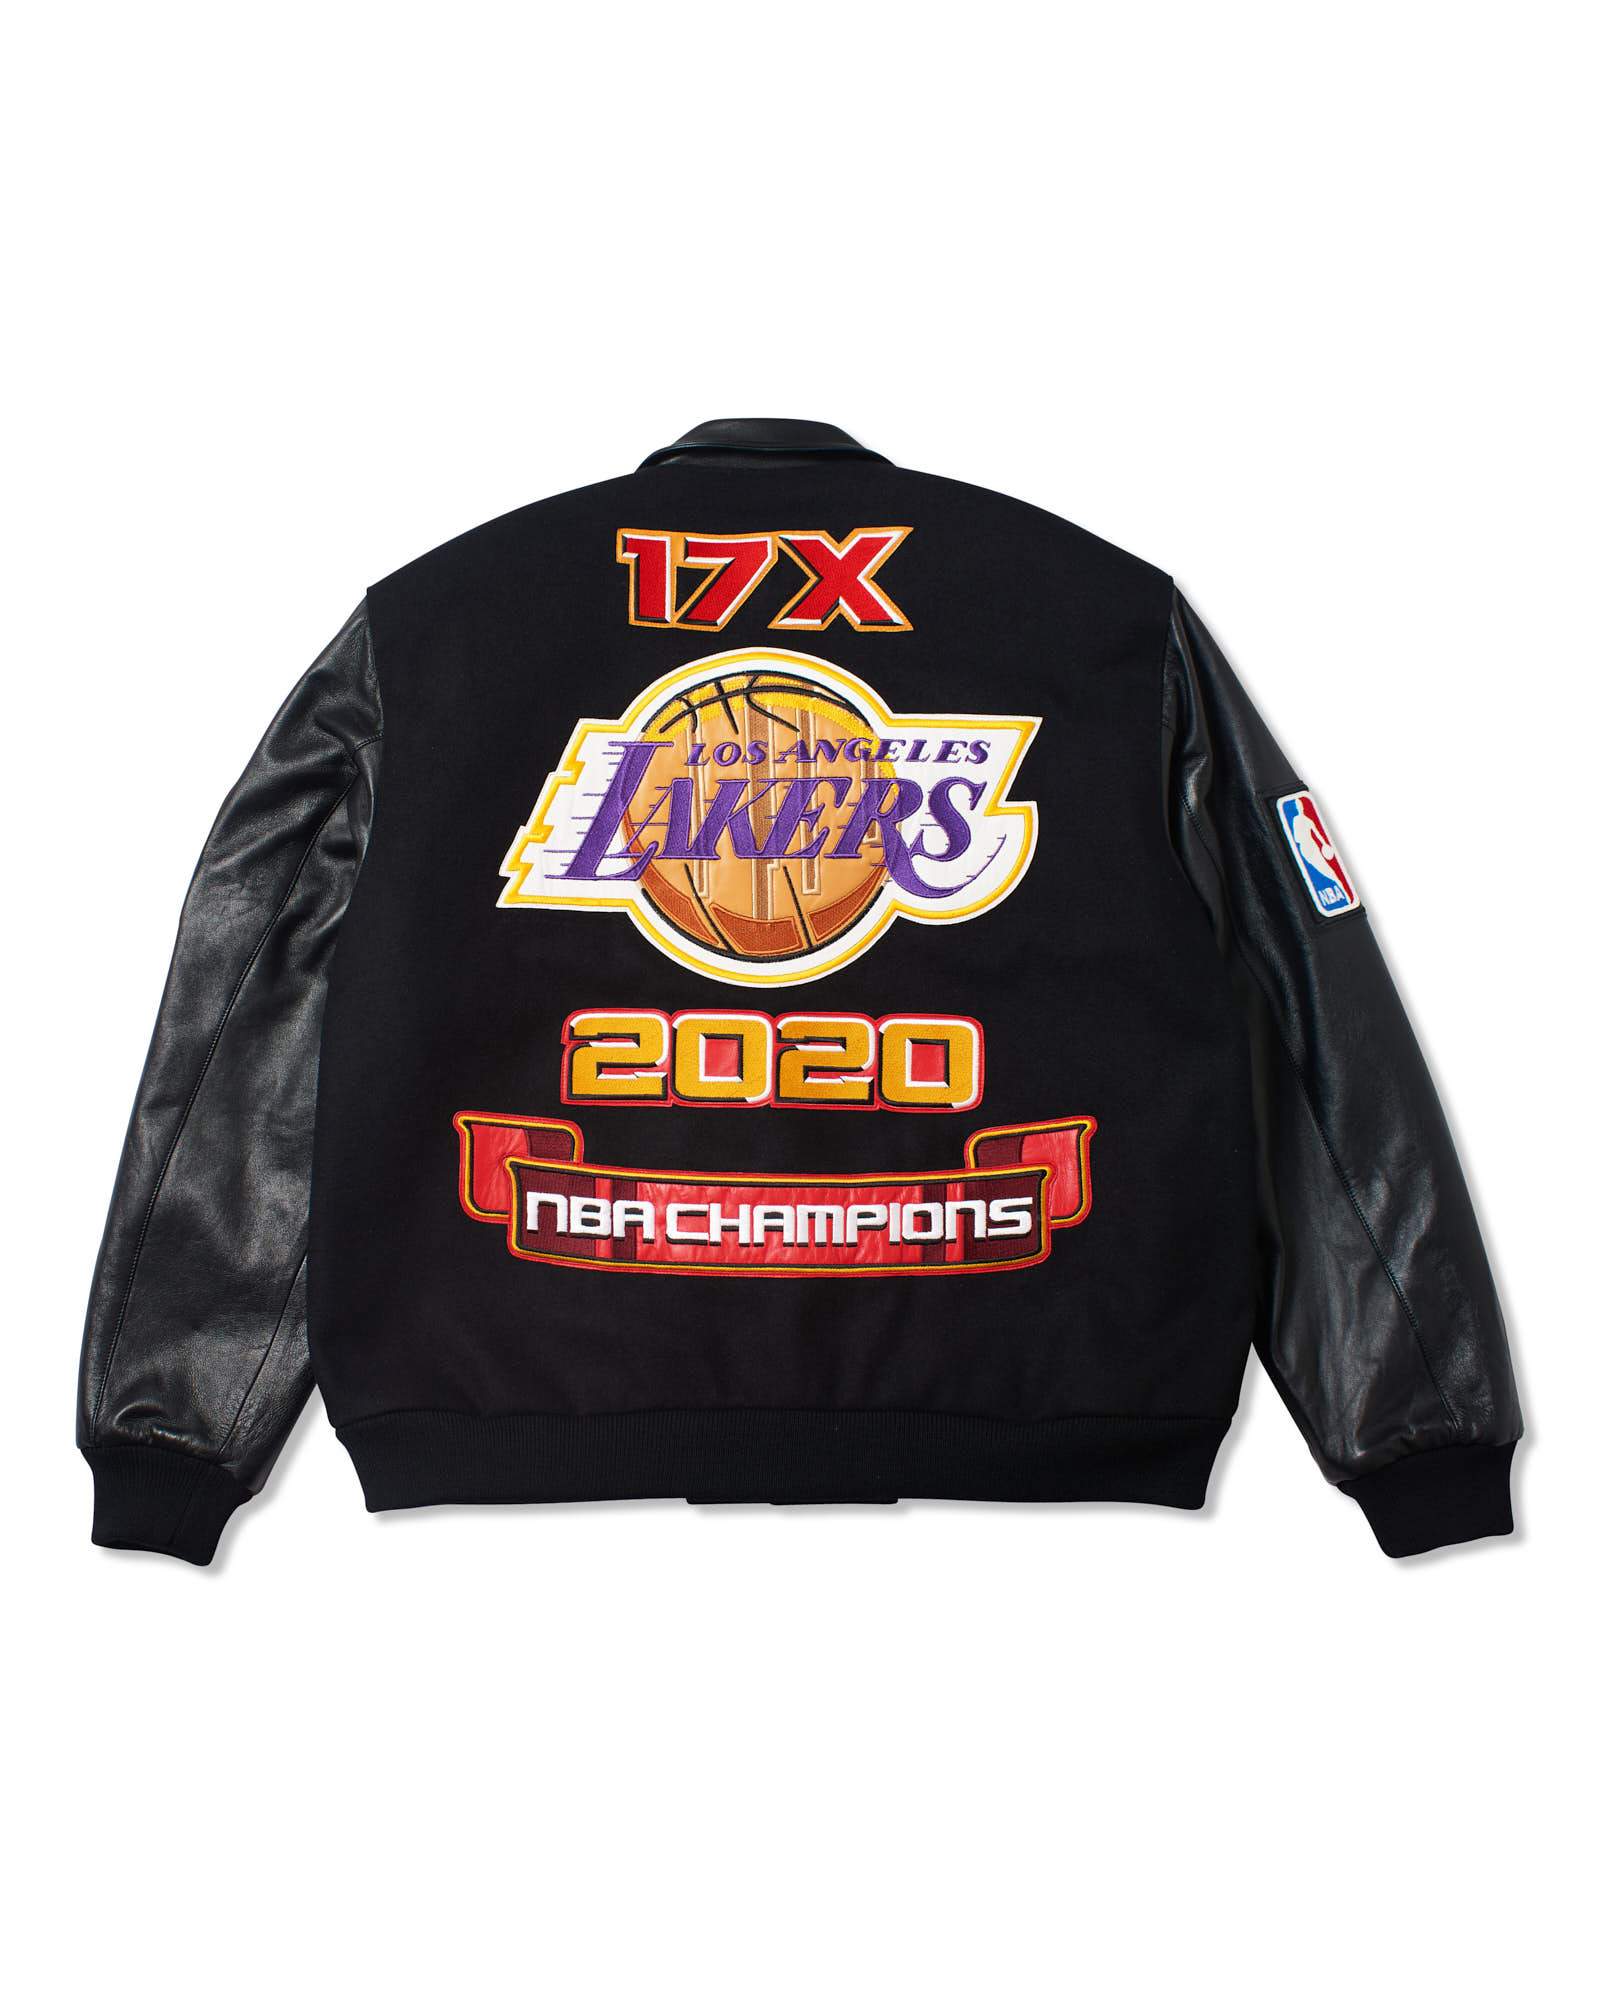 LOS ANGELES LAKERS 2020 CHAMPIONSHIP GENUINE LEATHER JACKET